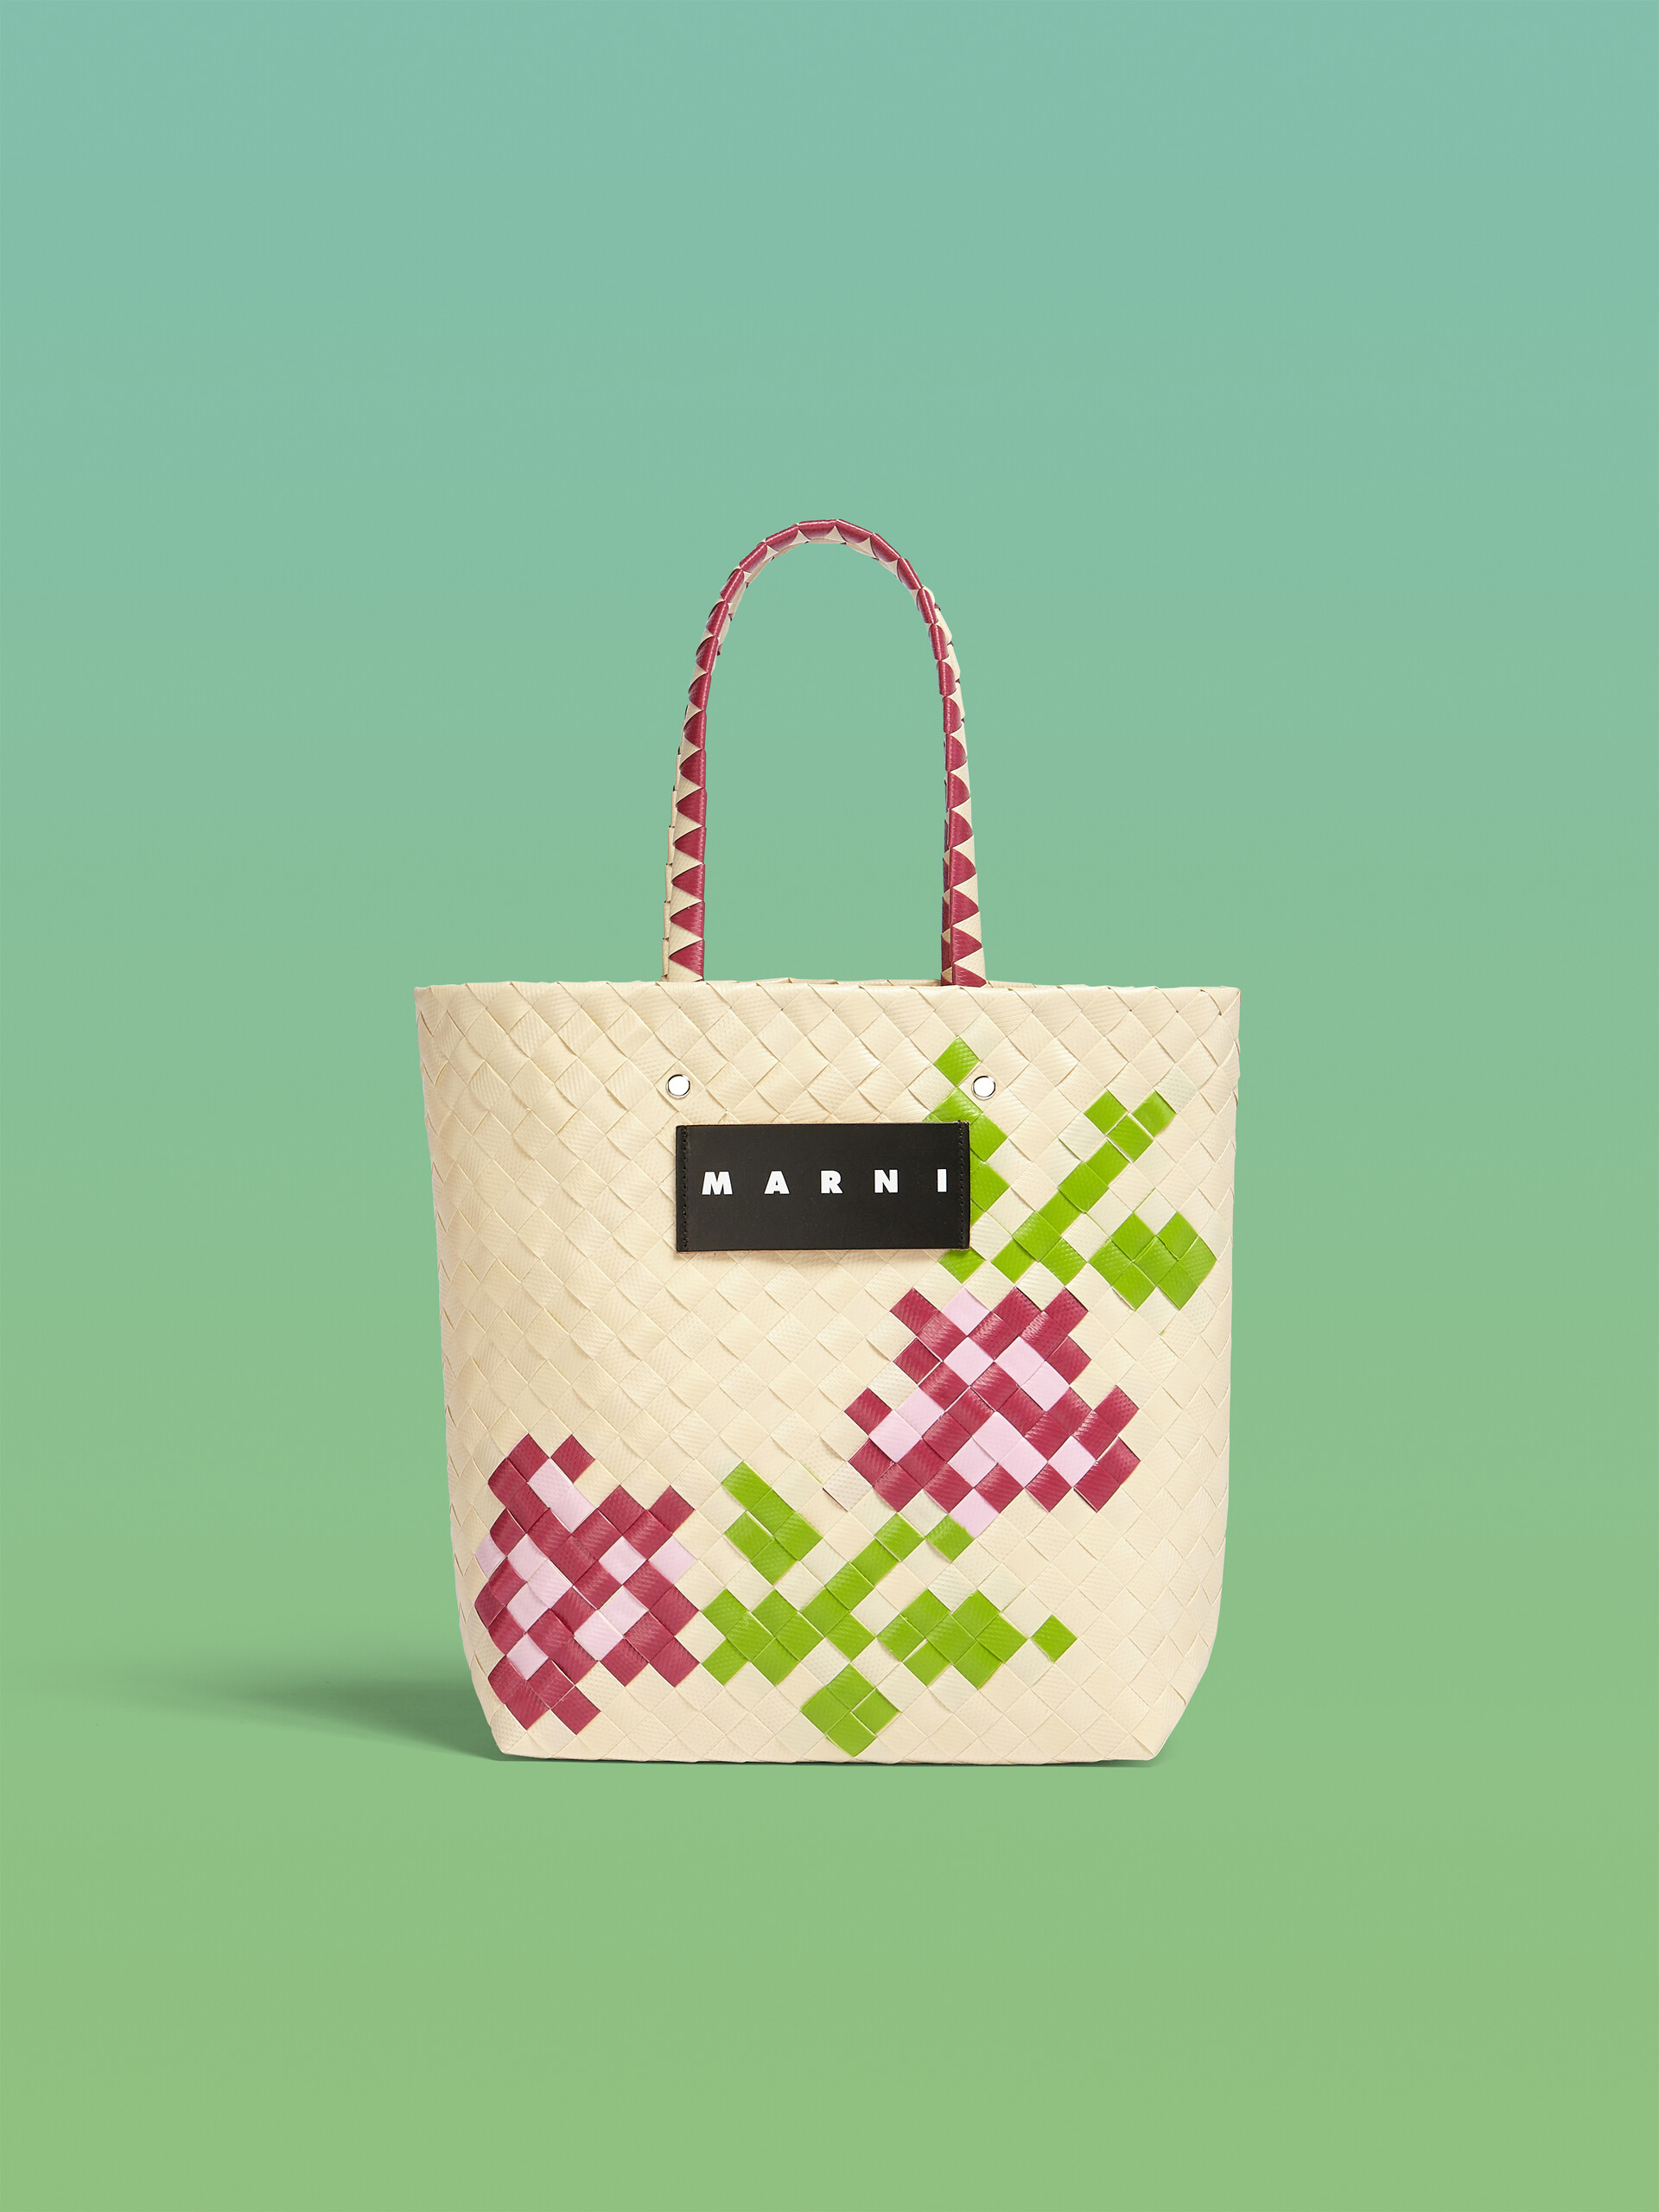 MARNI MARKET small bag in white flower motif - Bags - Image 1